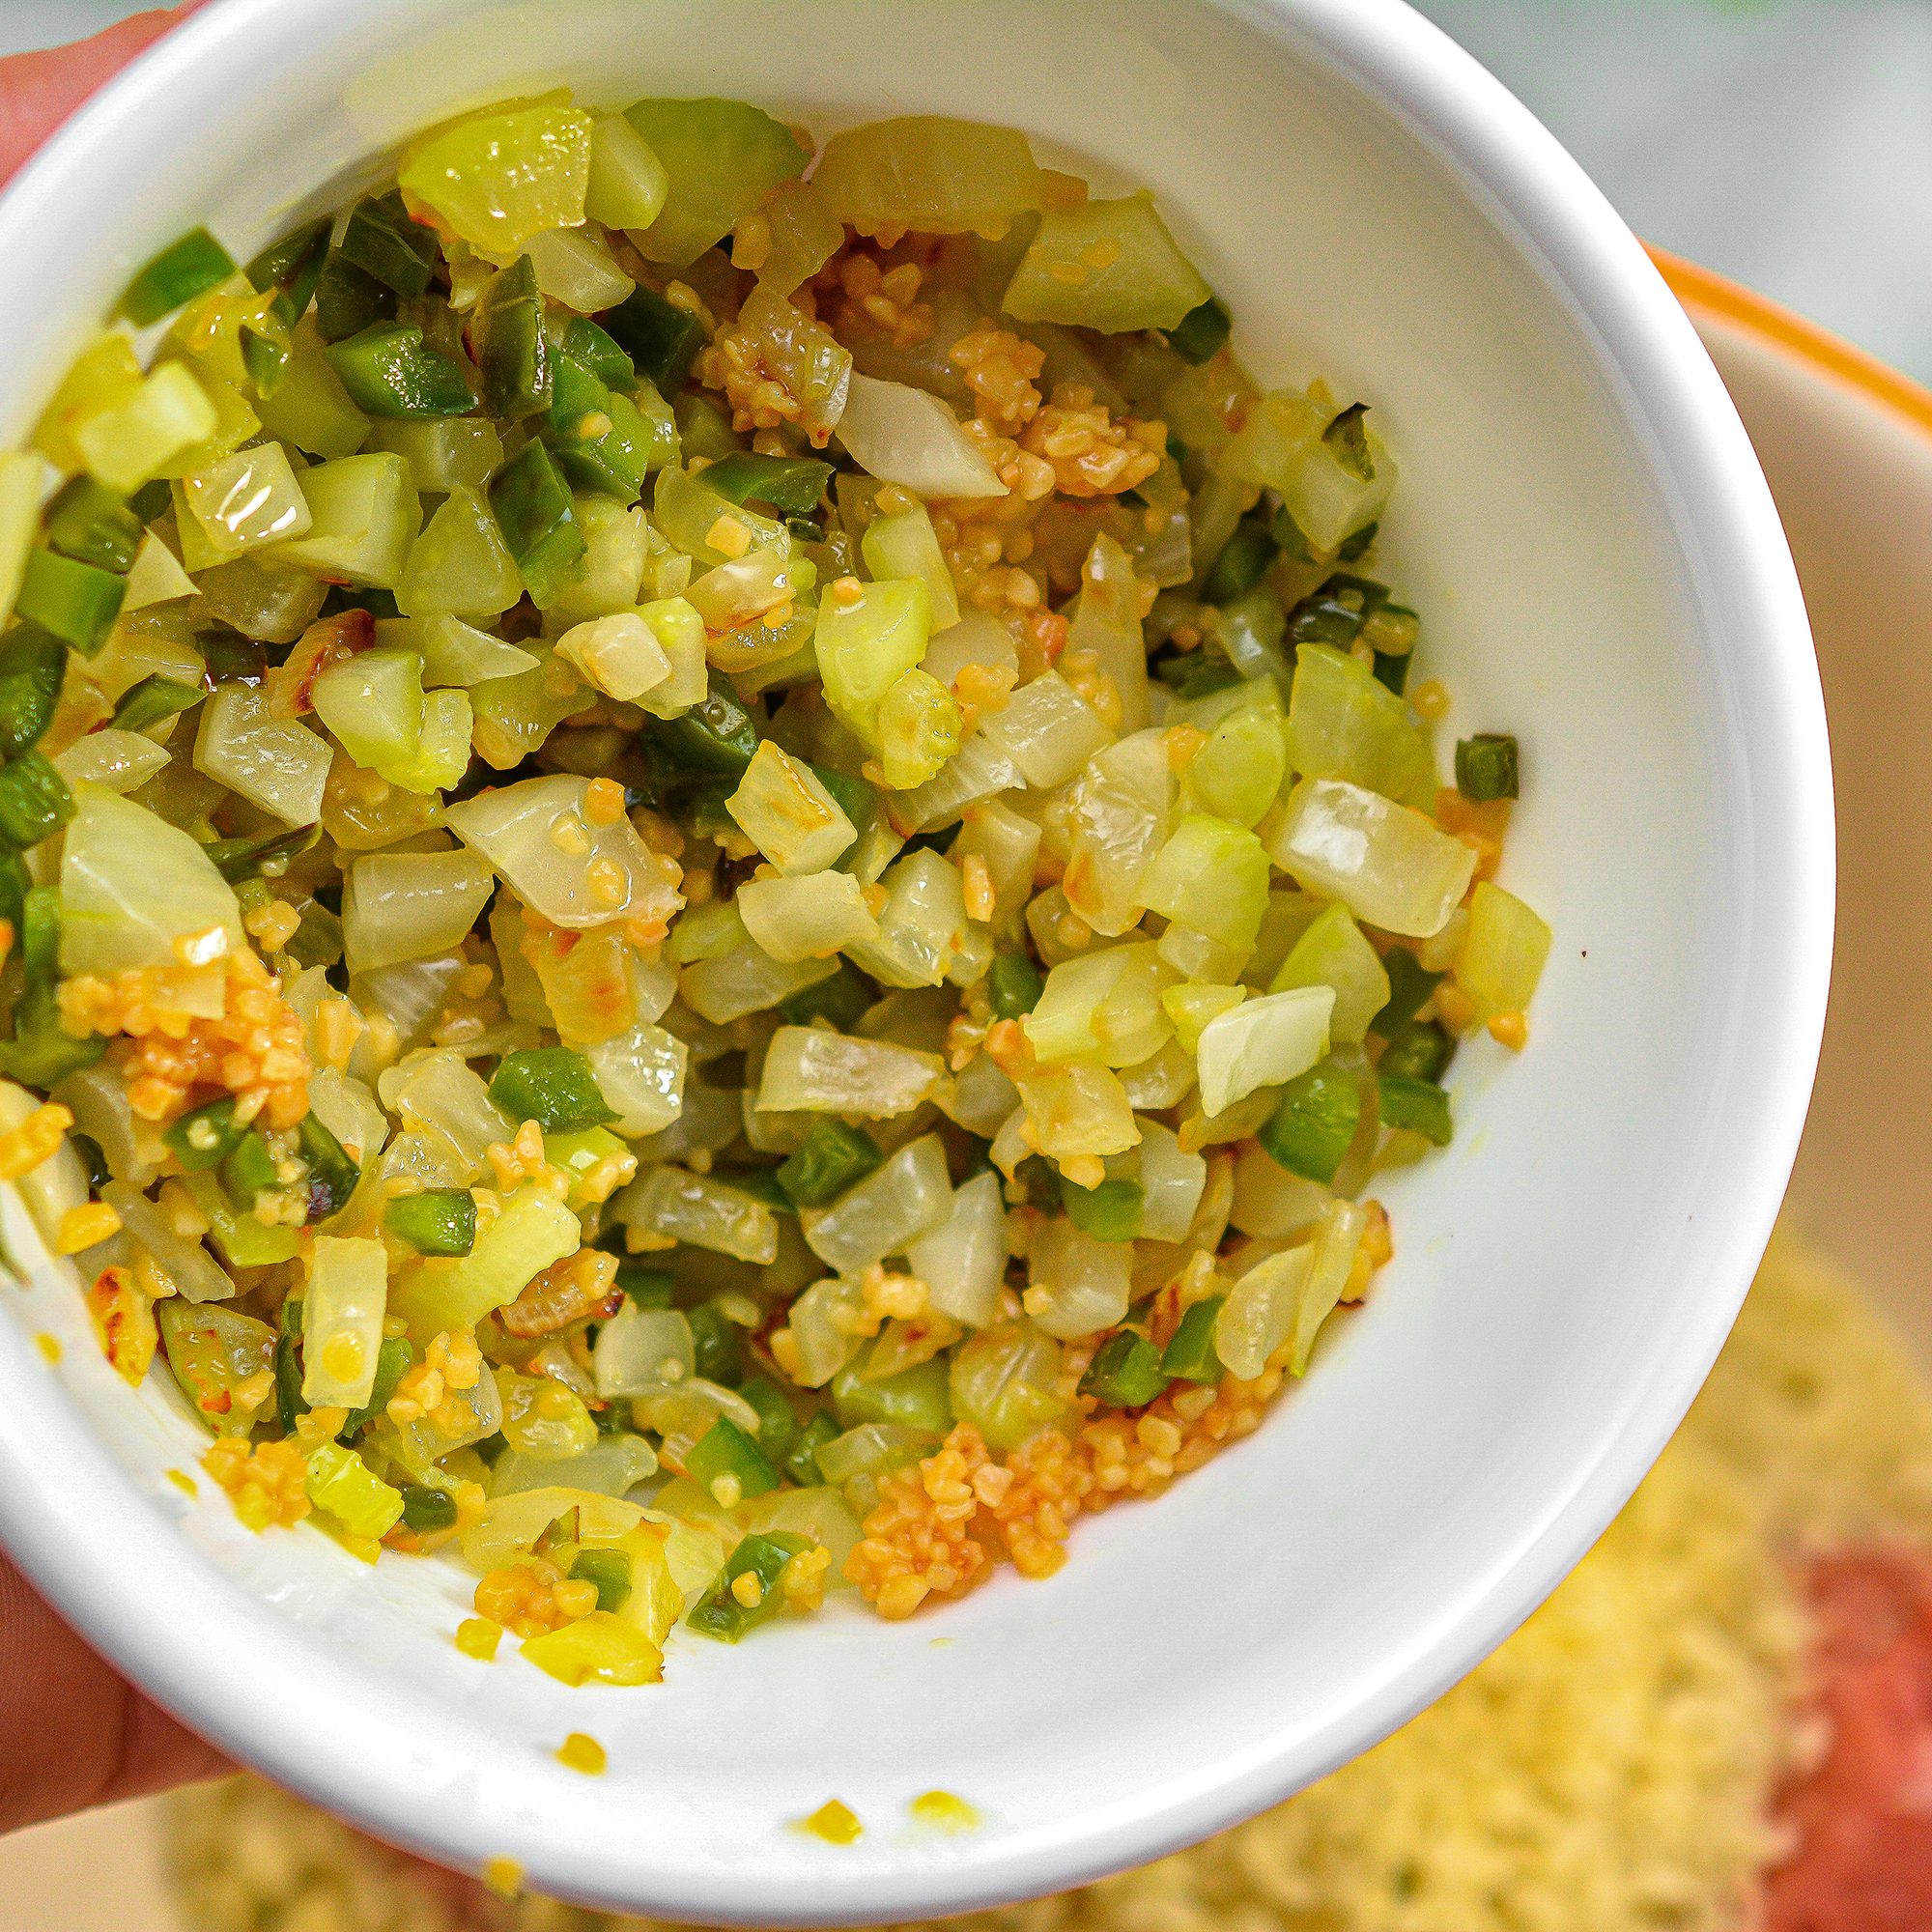 Add the cooled vegetables to a large mixing bowl with the ground turkey, cajun seasoning, 1 Tbsp chili flakes, chopped parsley, large egg, panko crumbs and salt and pepper to taste.